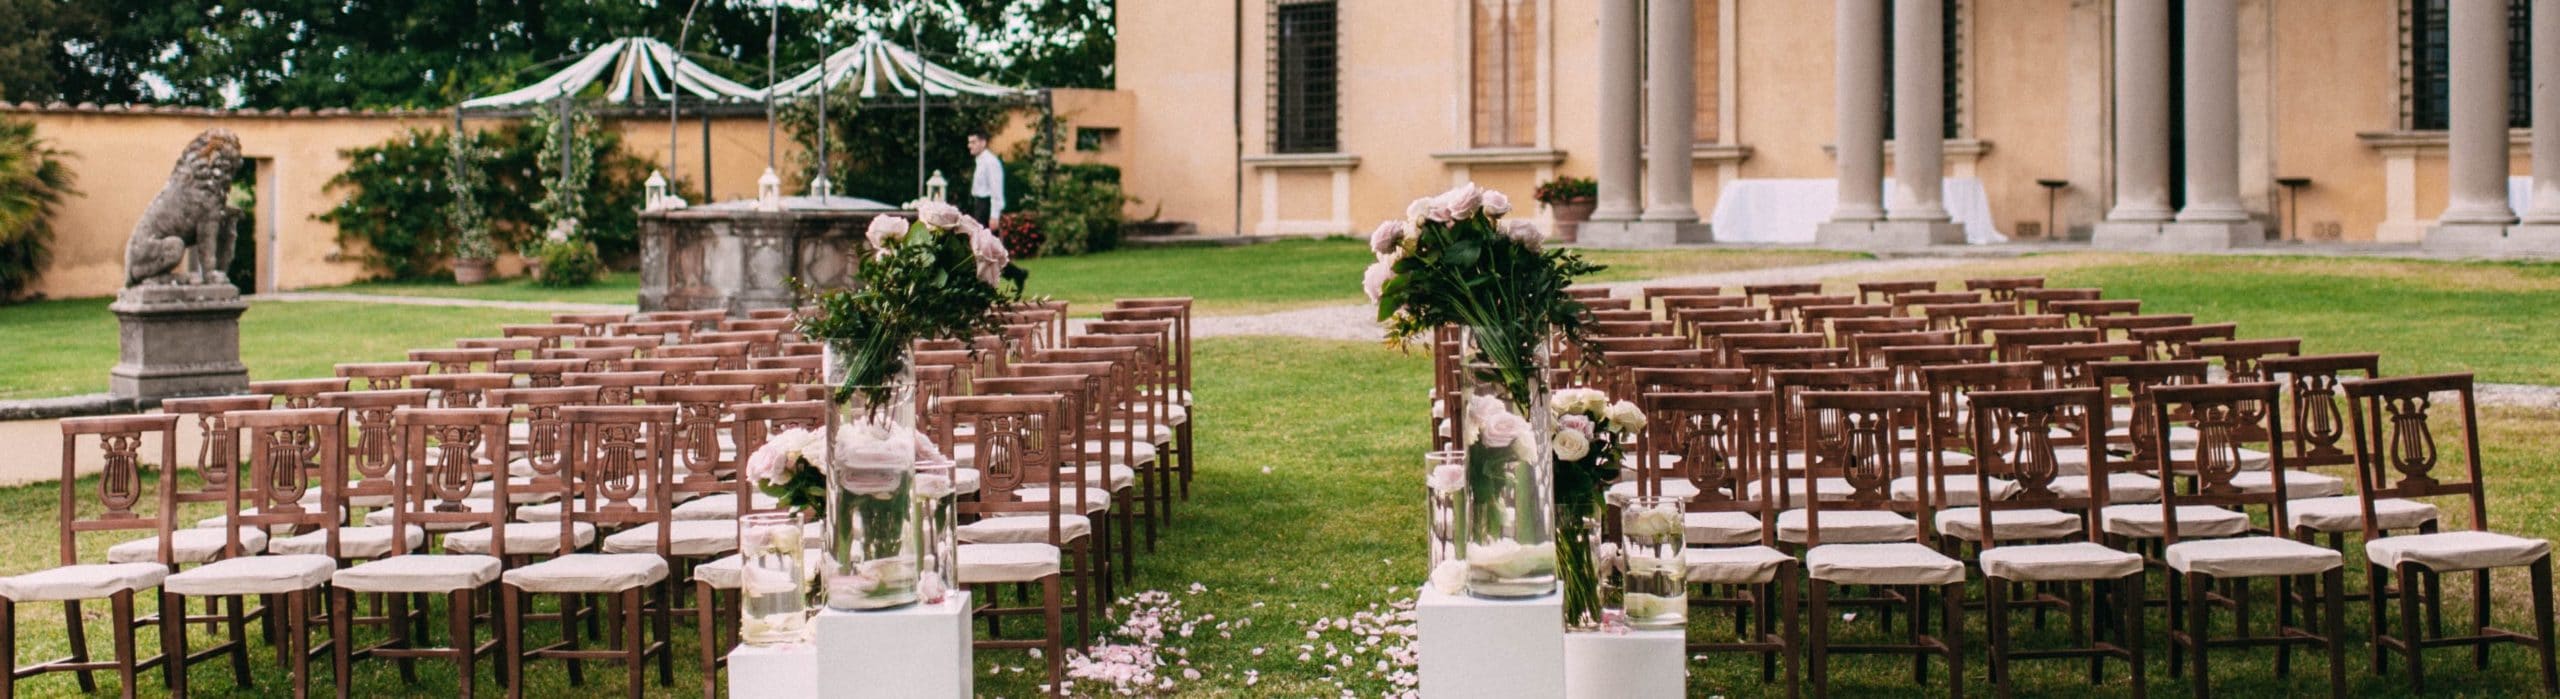 Tuscany Wedding Villas & Venues in Italy by Tuscandream